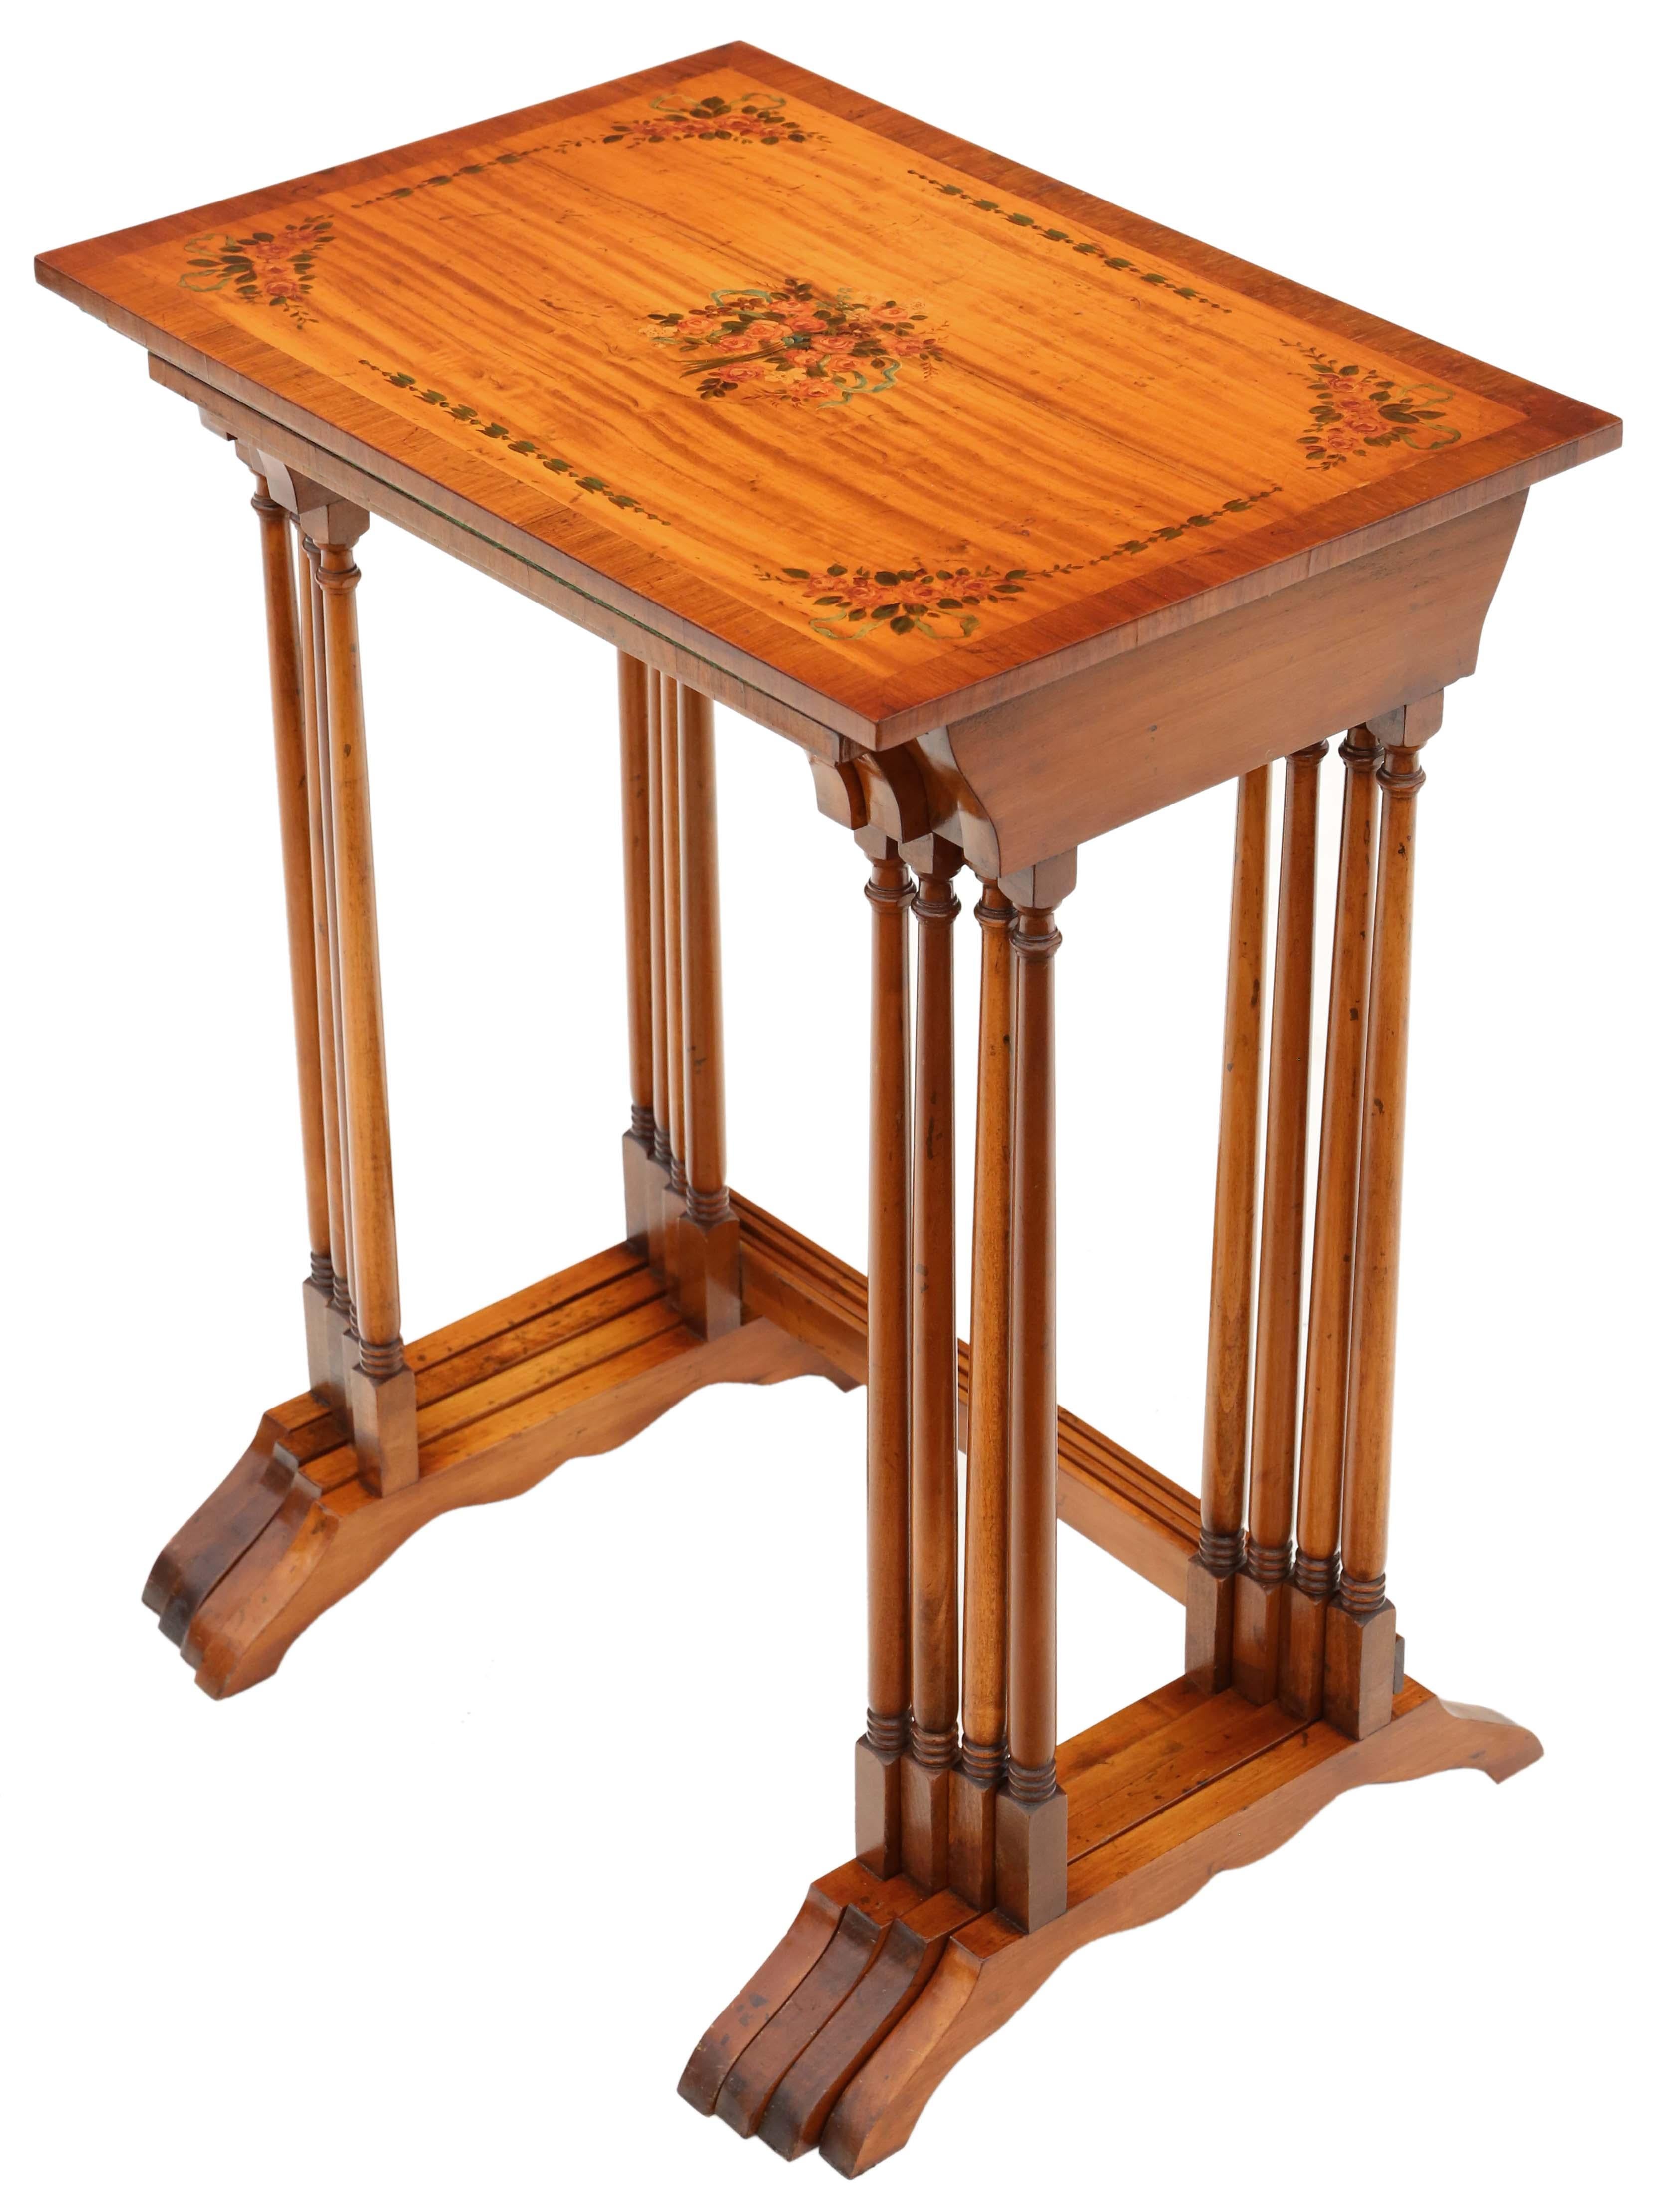 Antique retro vintage fine quality decorated satinwood nest of 4 Georgian revival tables C1960.
 
Very attractive, with lovely proportions and styling. Lovely painted decoration and light colour.
 
No loose joints or woodworm.
Some deliberate aging